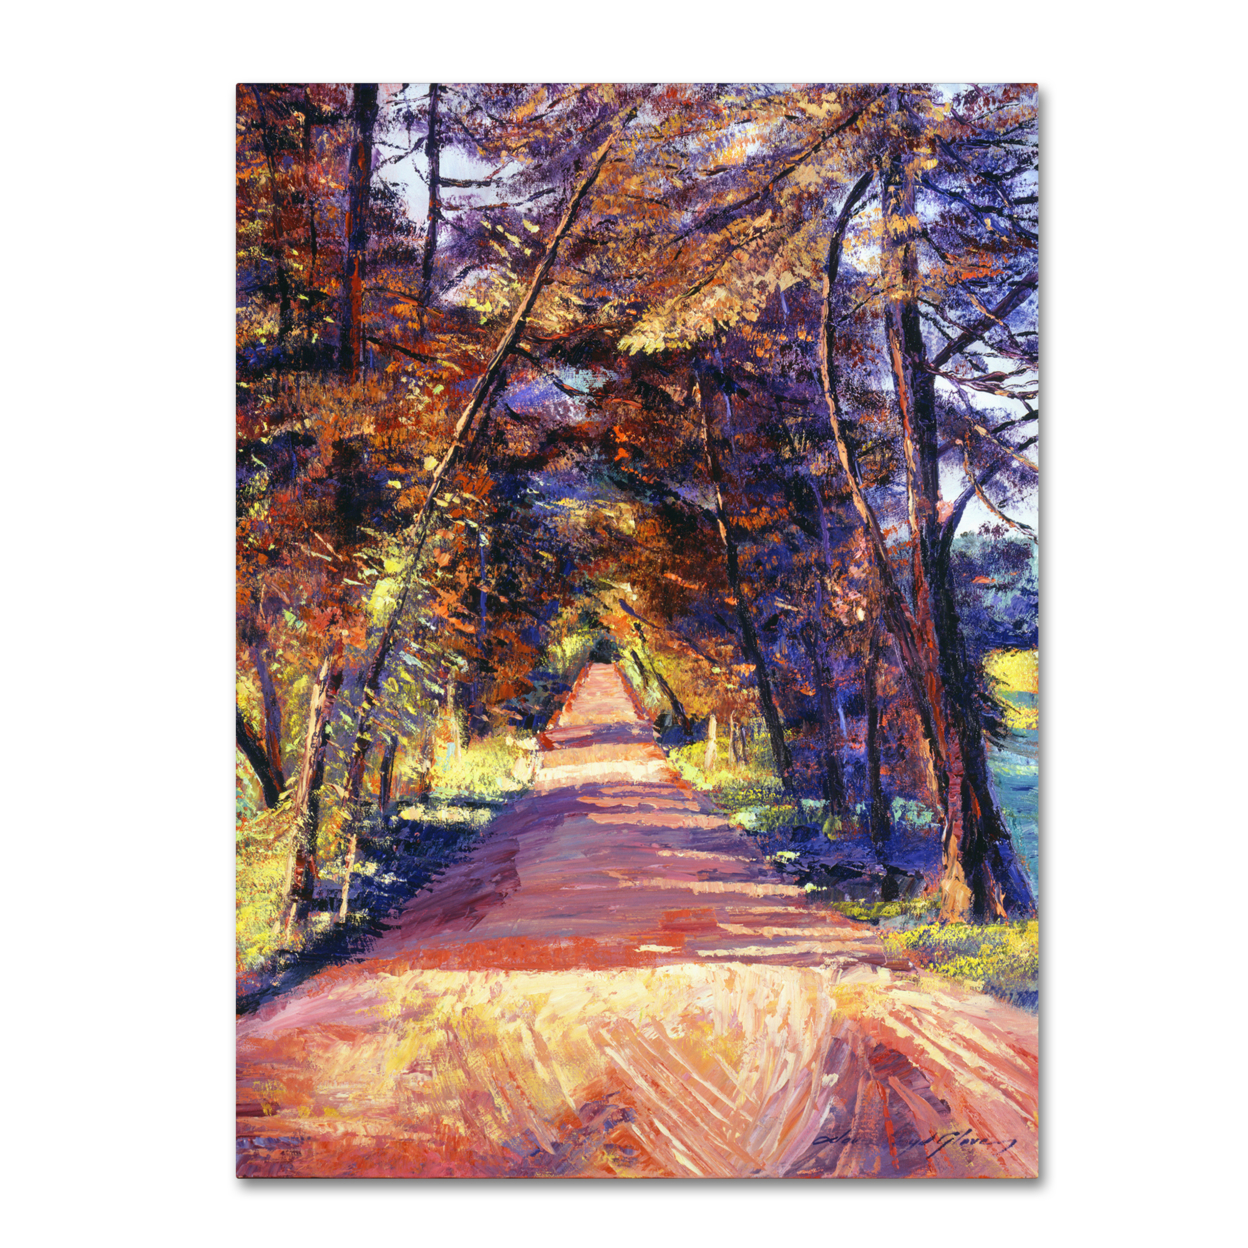 David Lloyd Glover 'Southern France Country' Canvas Wall Art 35 X 47 Inches